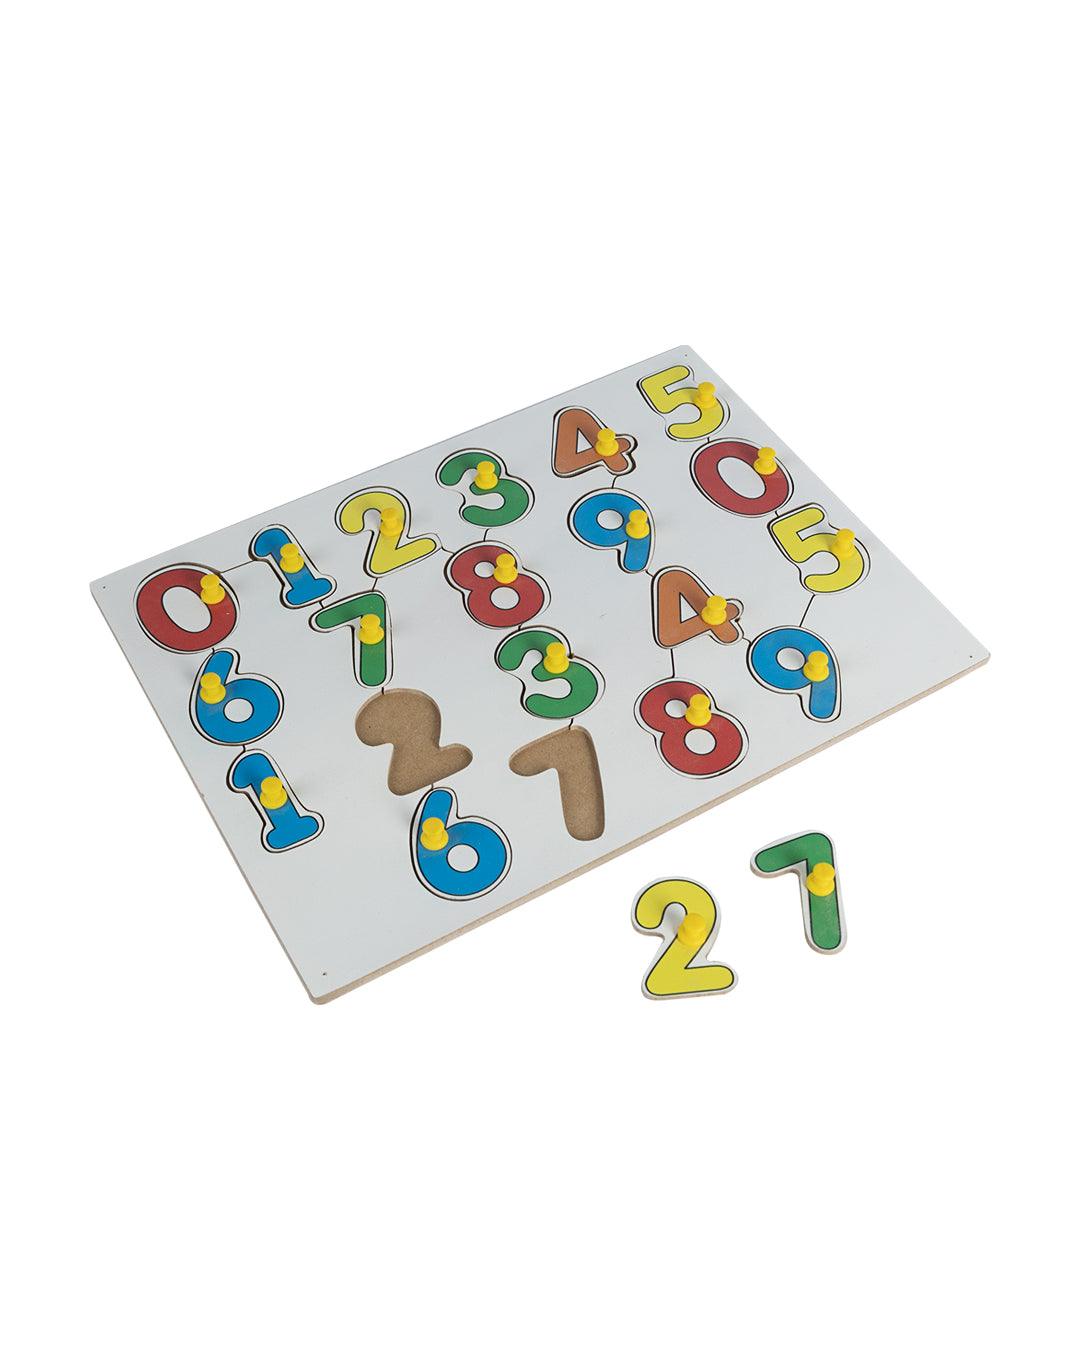 Little Genius English Numbers 0 To 9 Puzzle - Education Toy for Kids - MARKET 99